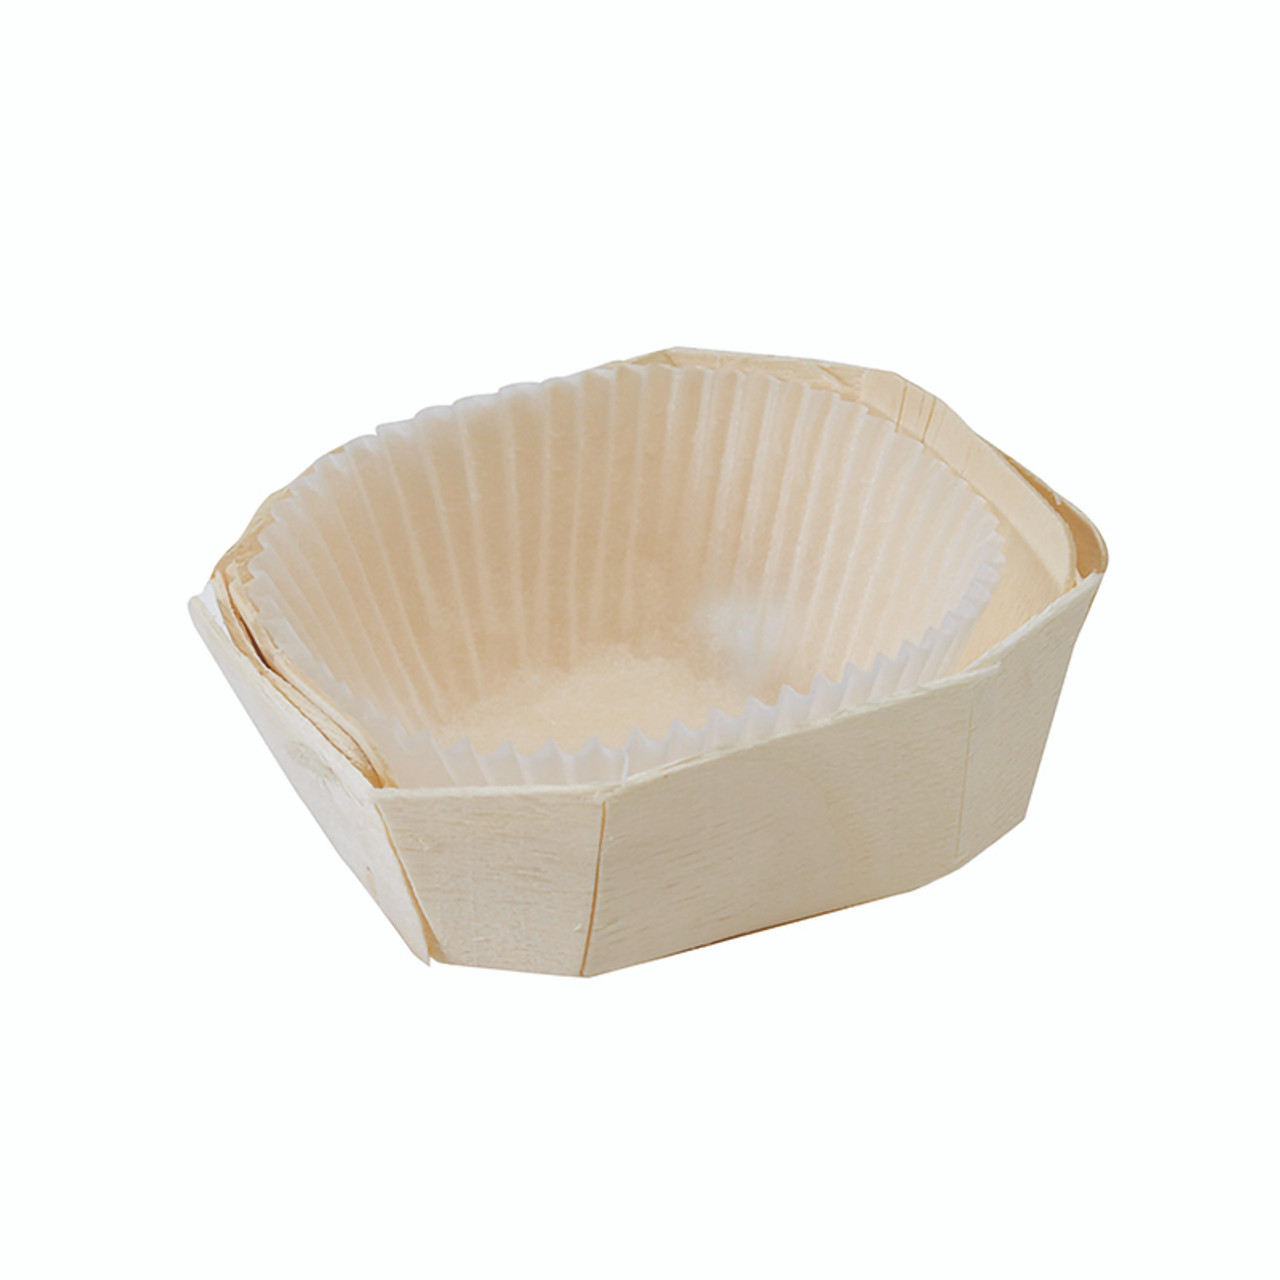 Order a Sample - Lovely Wooden Baking Mold 4oz L:3.7 x W:2.6 x H:1.5in